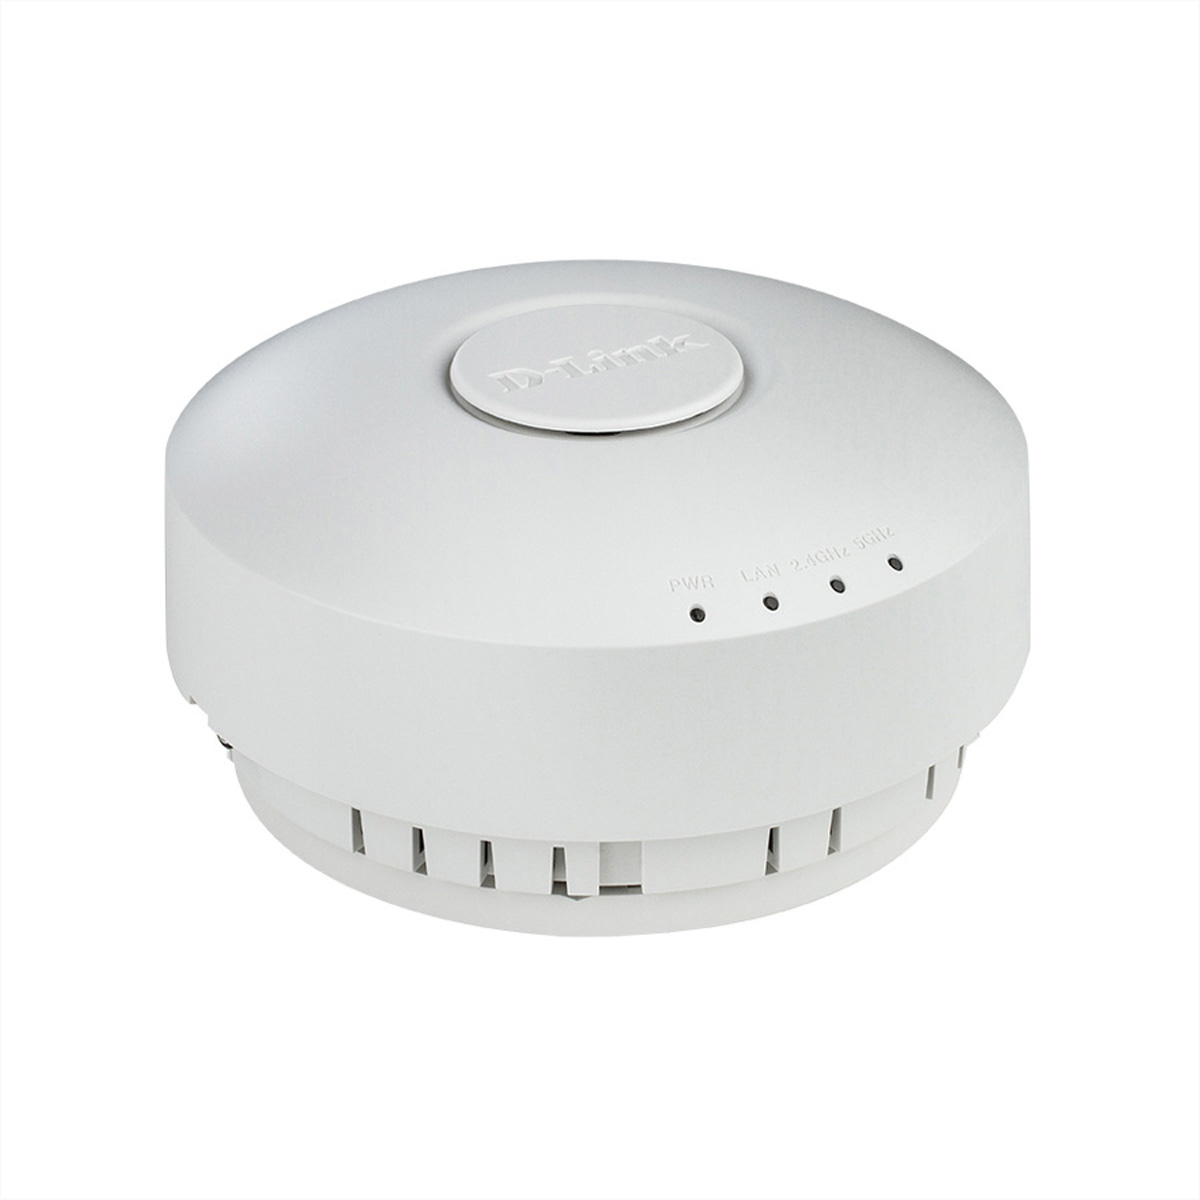 D-LINK DWL-6610AP Unified Access WLAN Access Points Point Gbit/s Dualband 1,2 AC1200